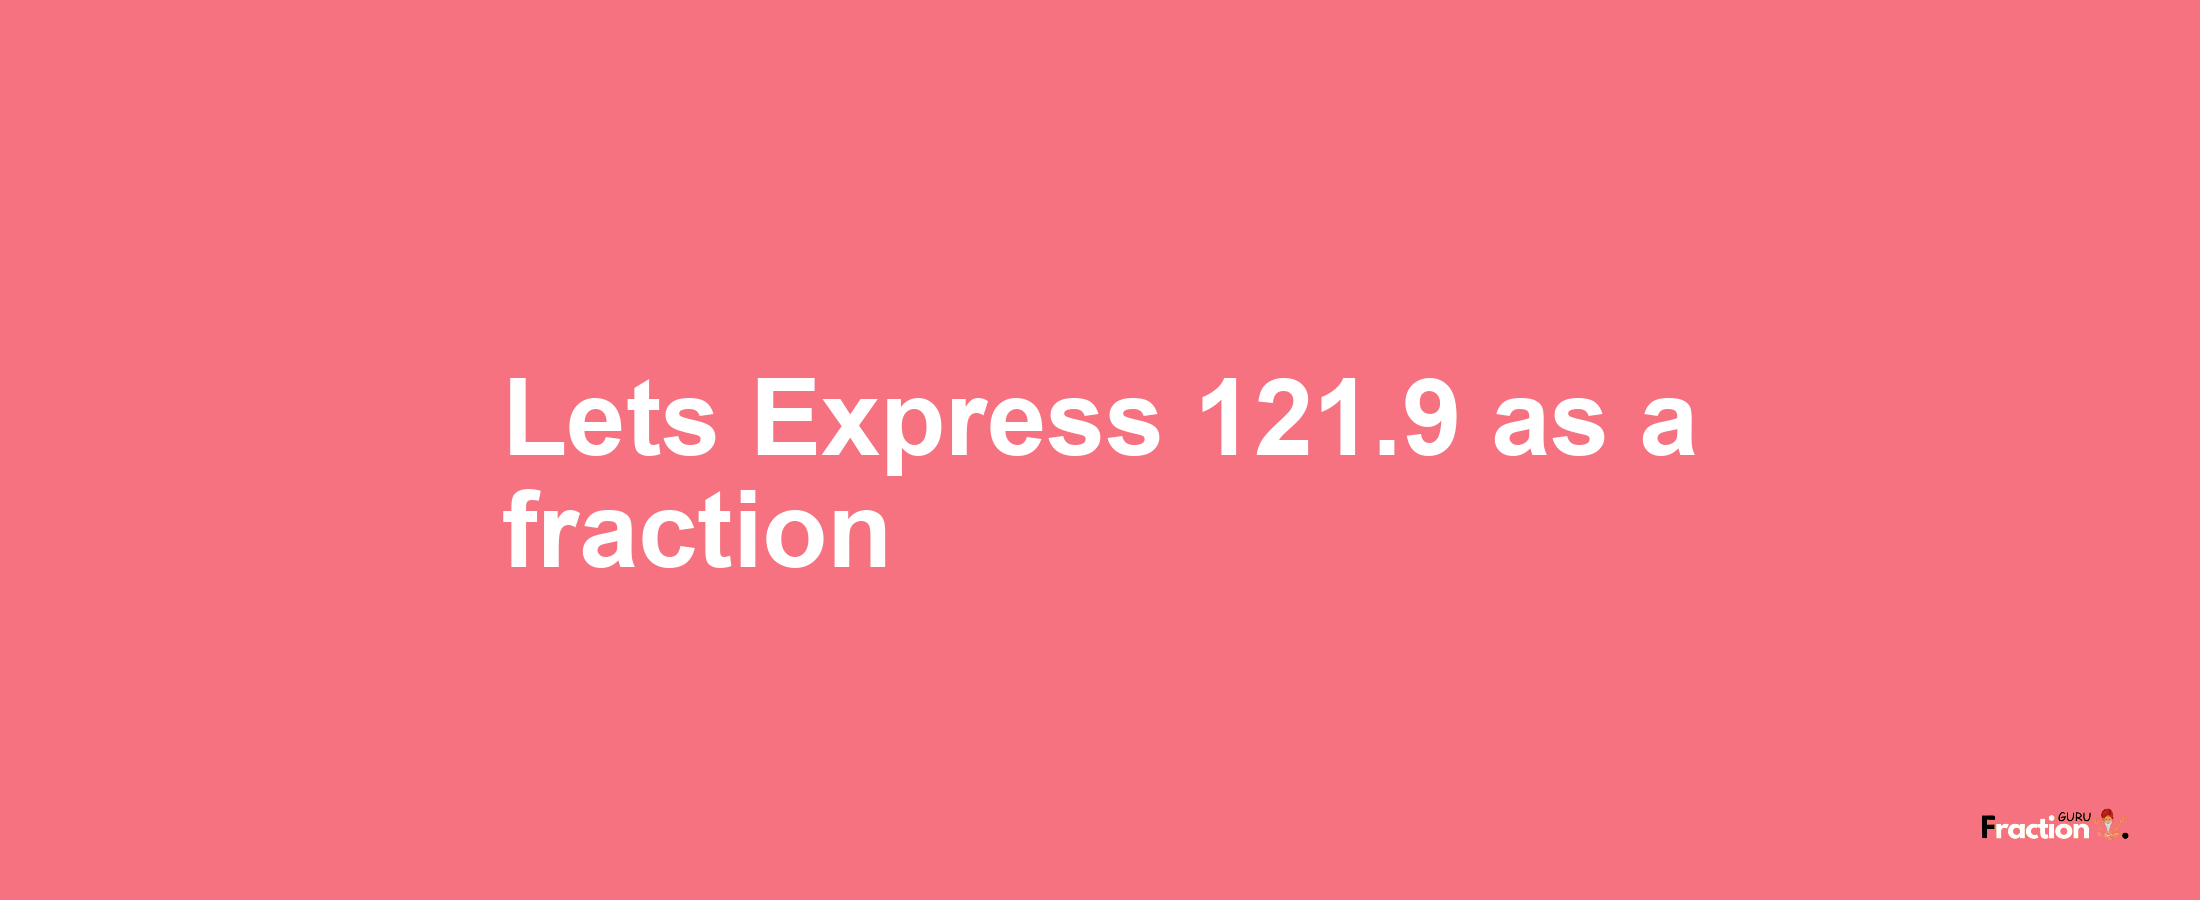 Lets Express 121.9 as afraction